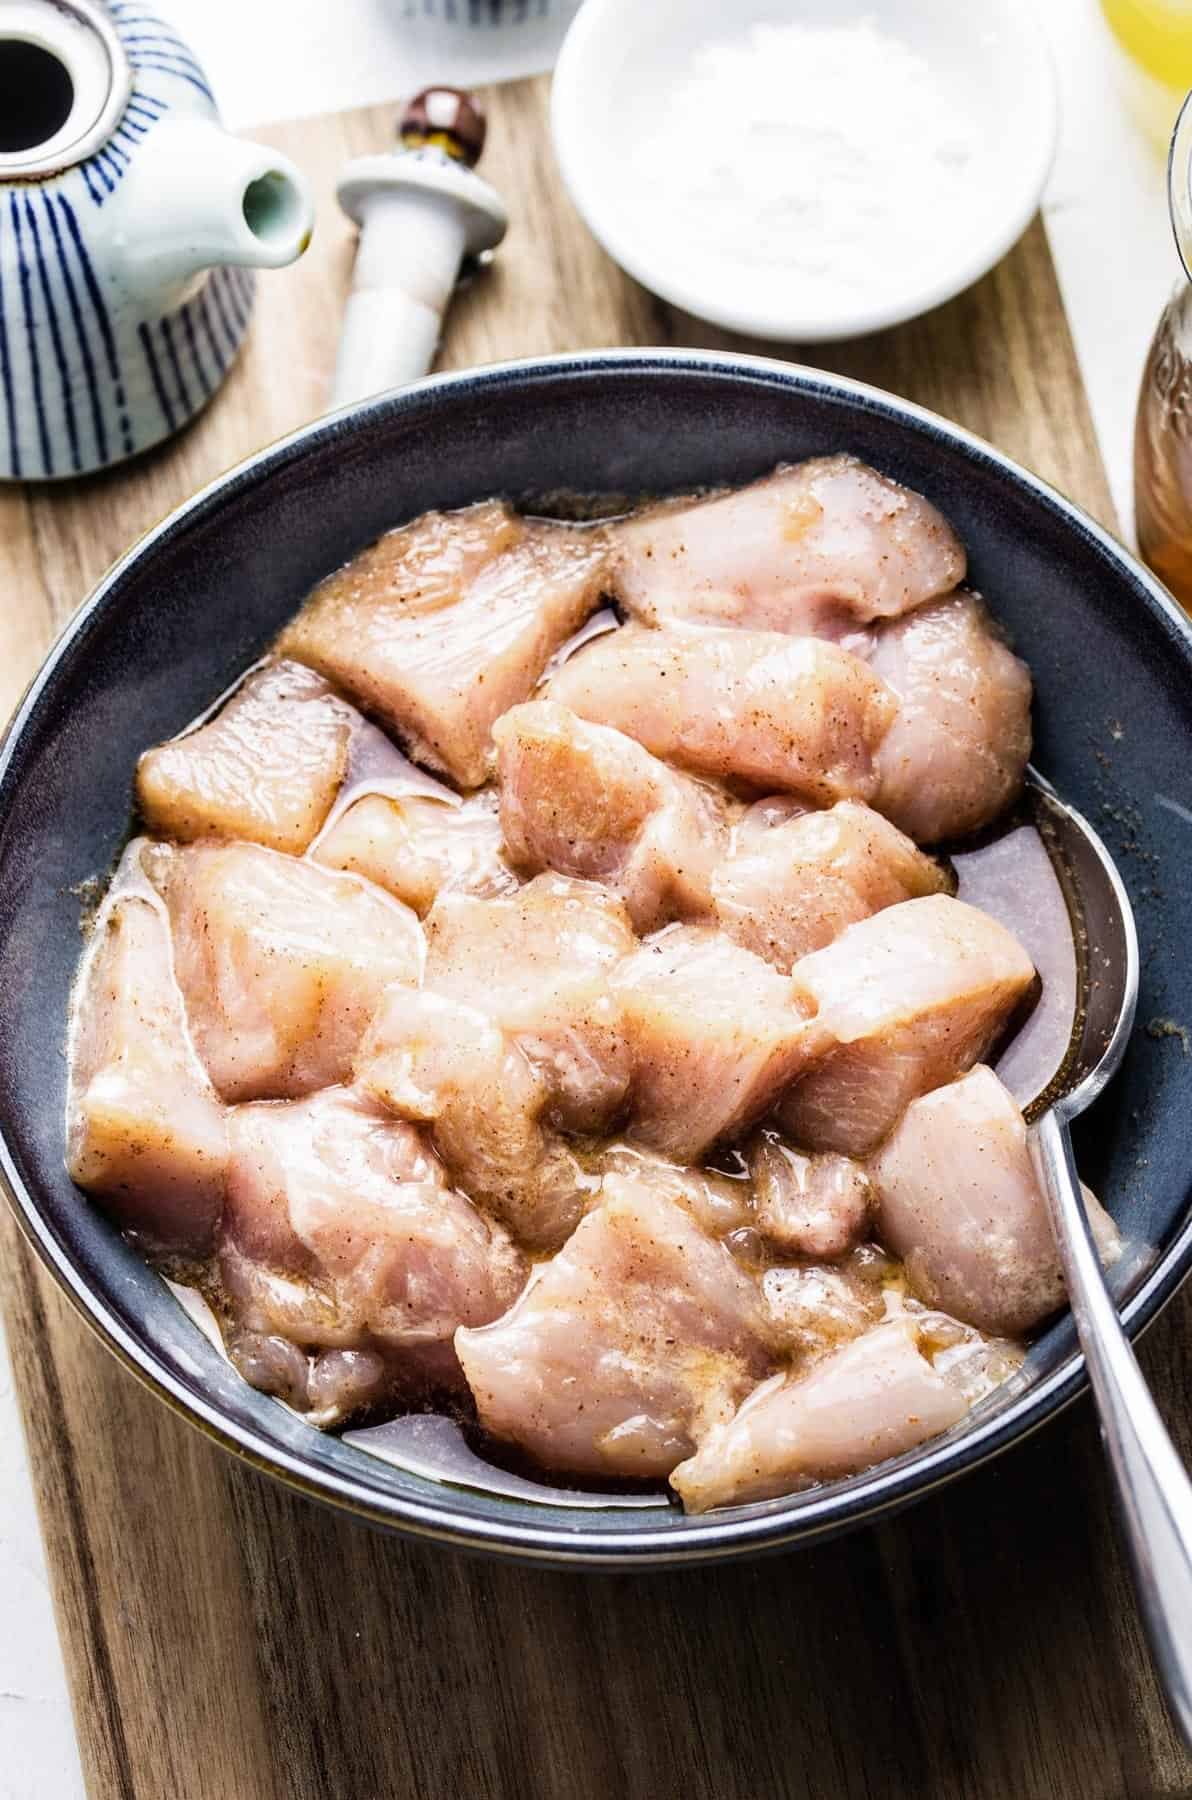 Cubes of raw chicken marinating in a bowl with a metal spoon inside.